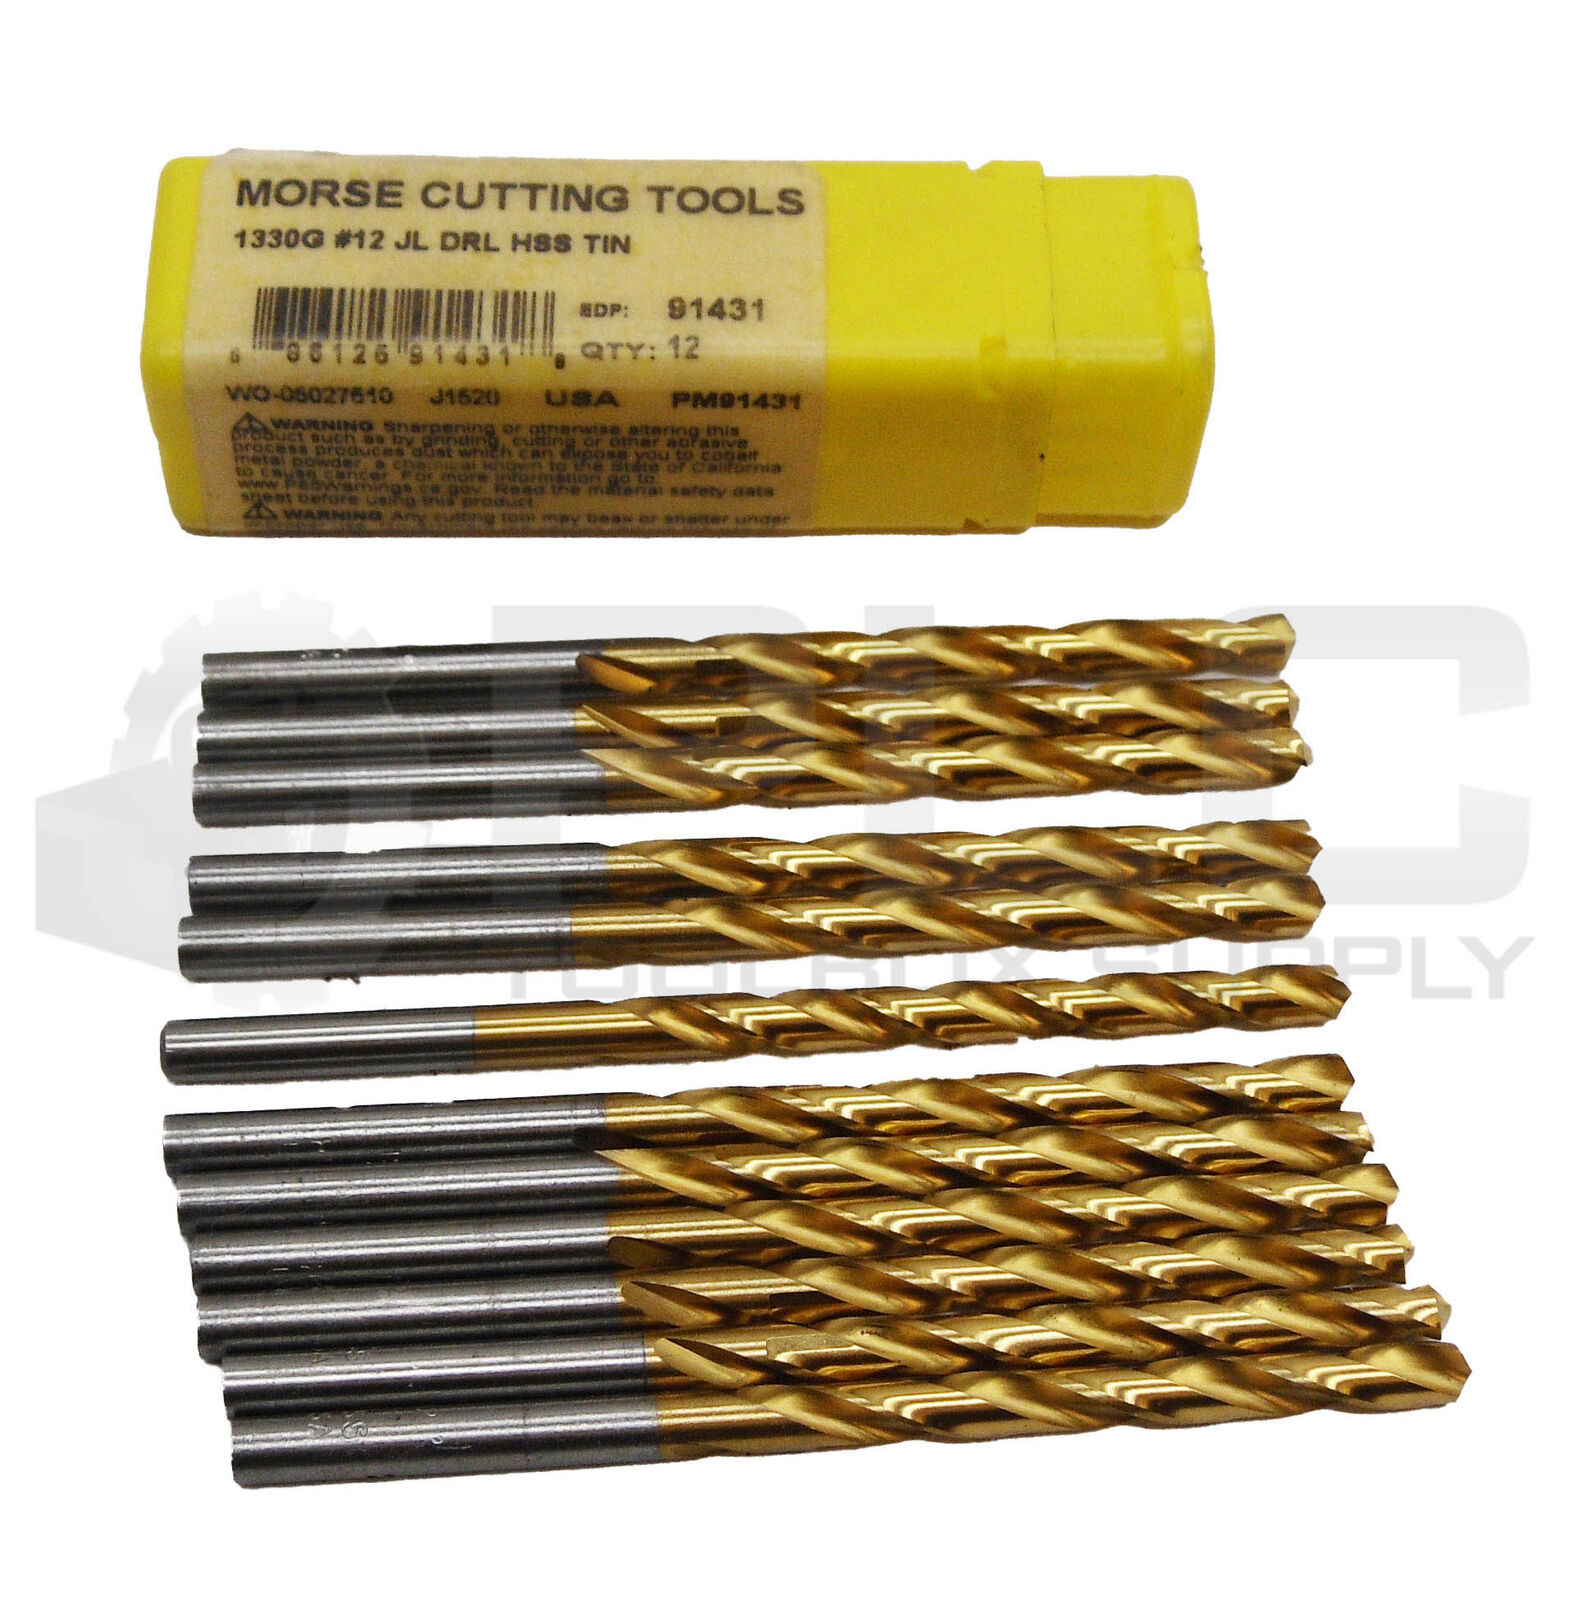 NEW PACK OF 12 MORSE CUTTING TOOLS 91431 #12 JOBBER LENGTH DRILL 1330G